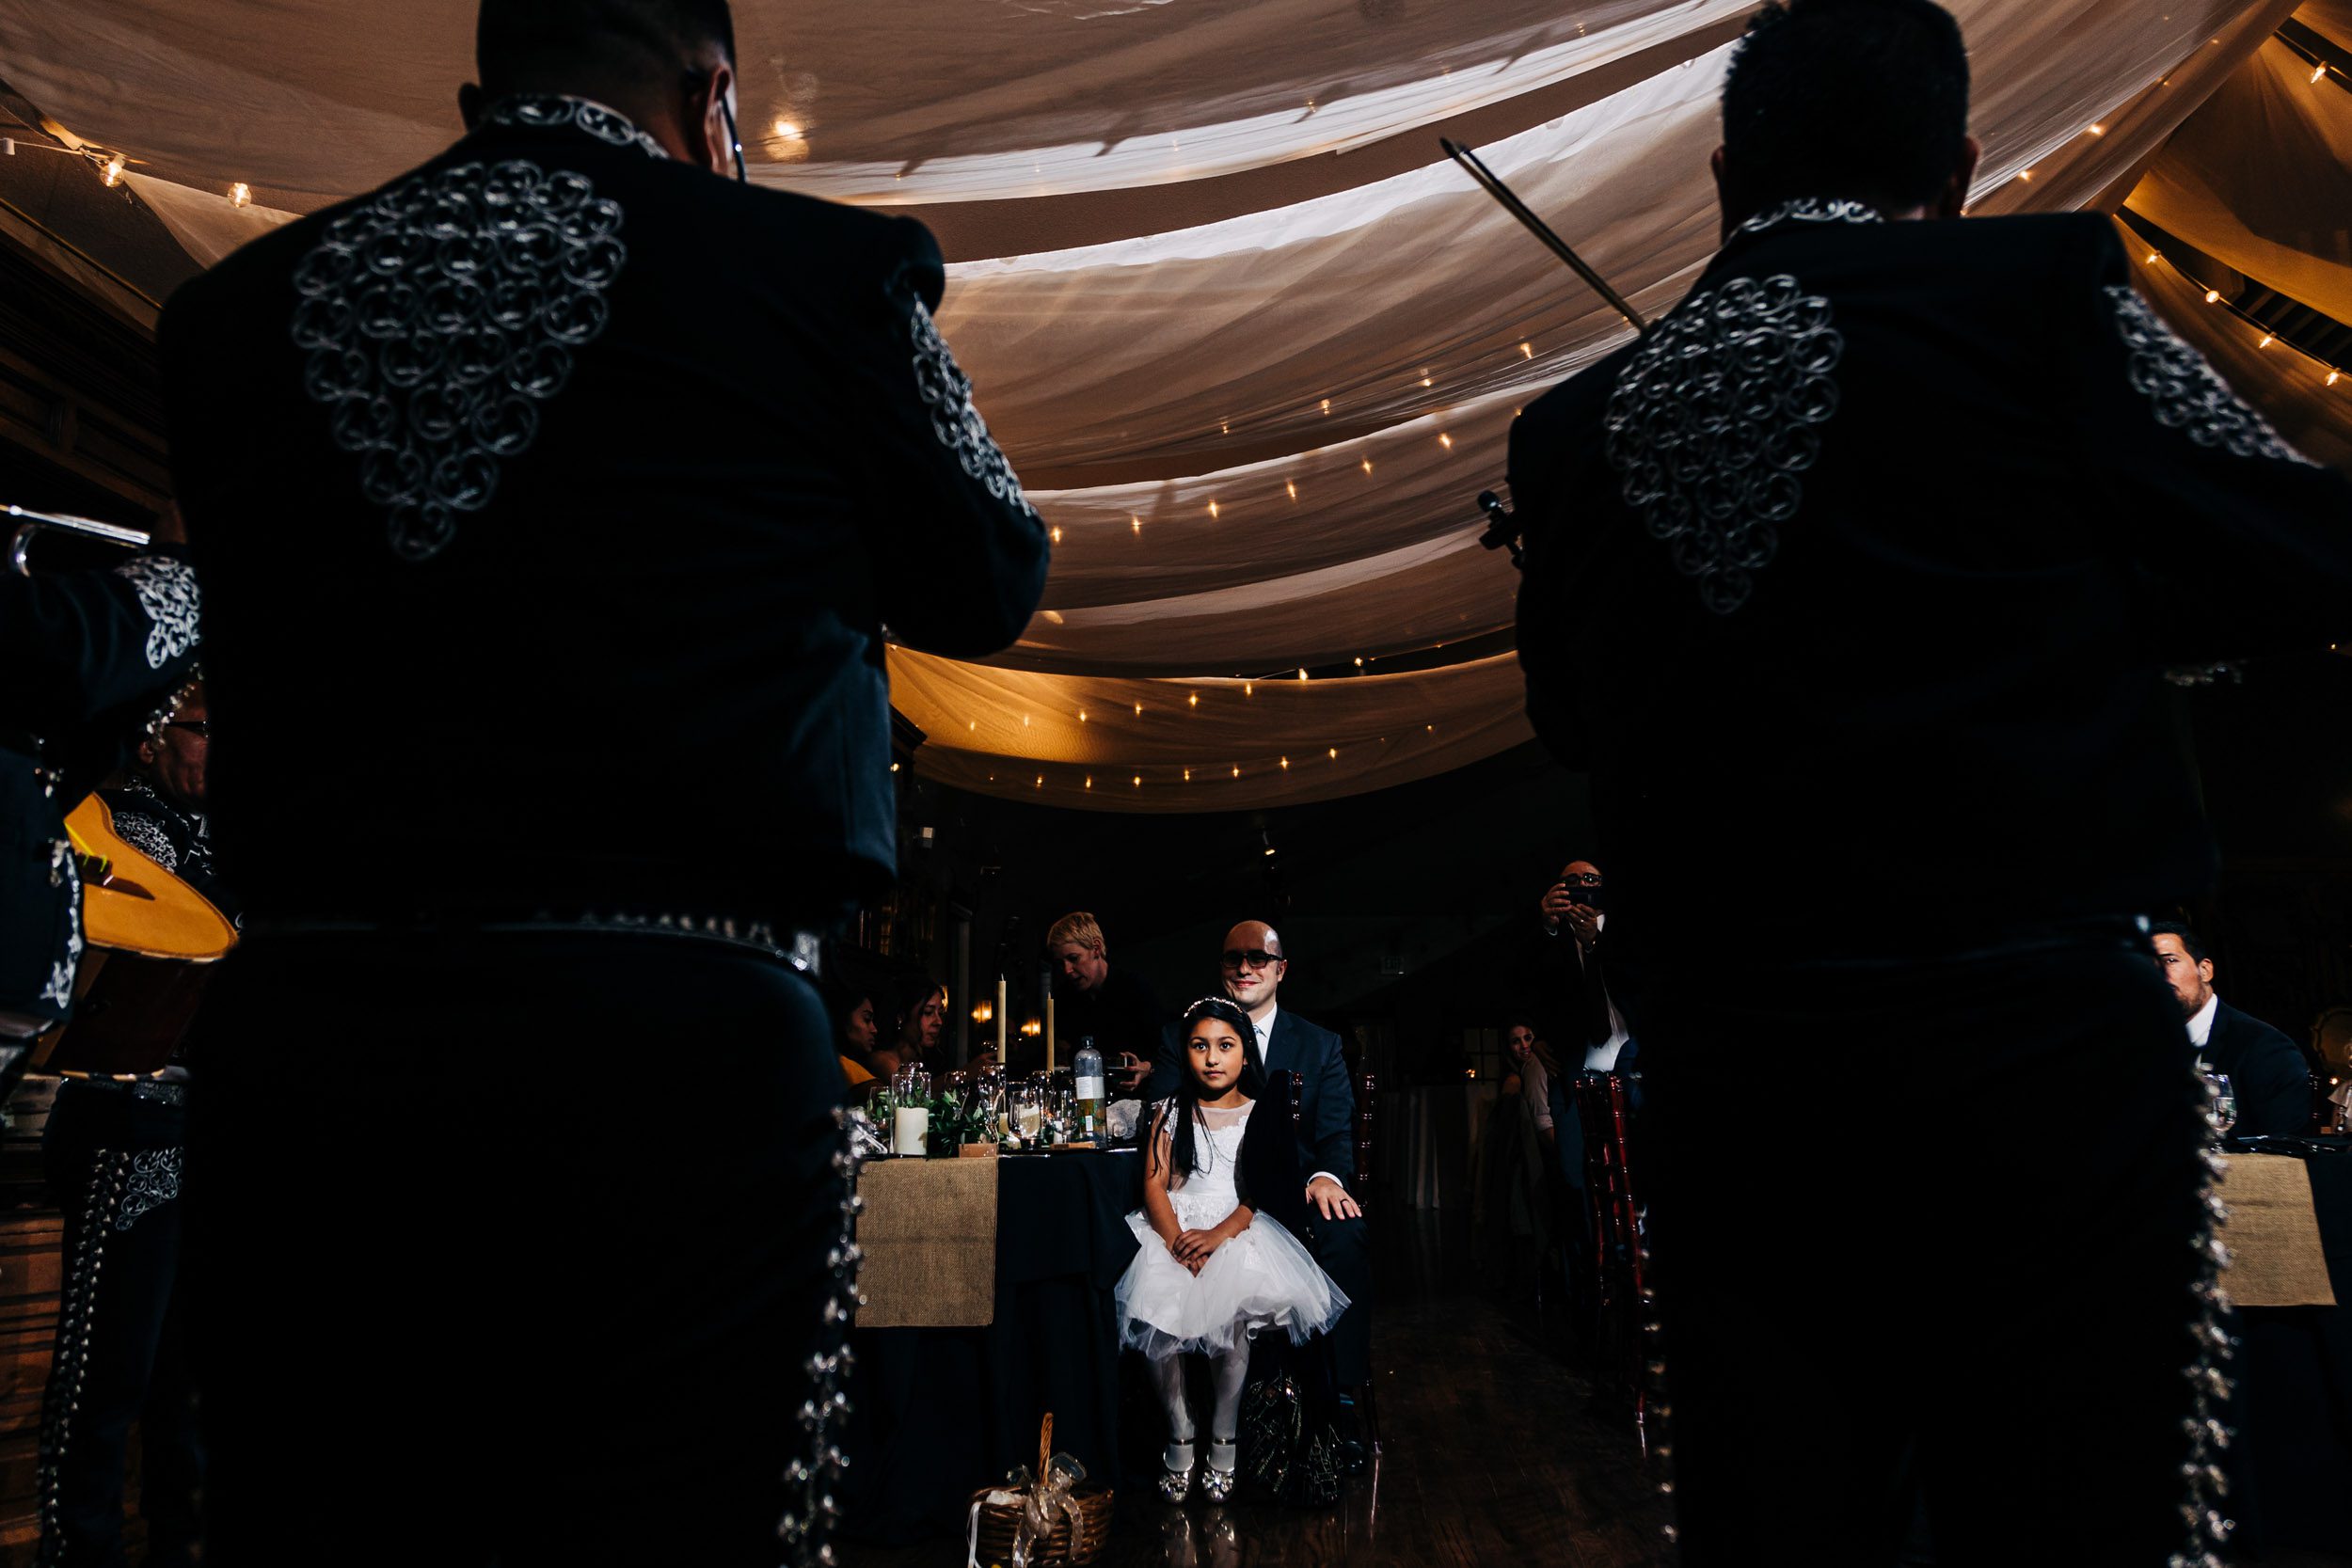 little girl watching mariachi band play at wedding reception